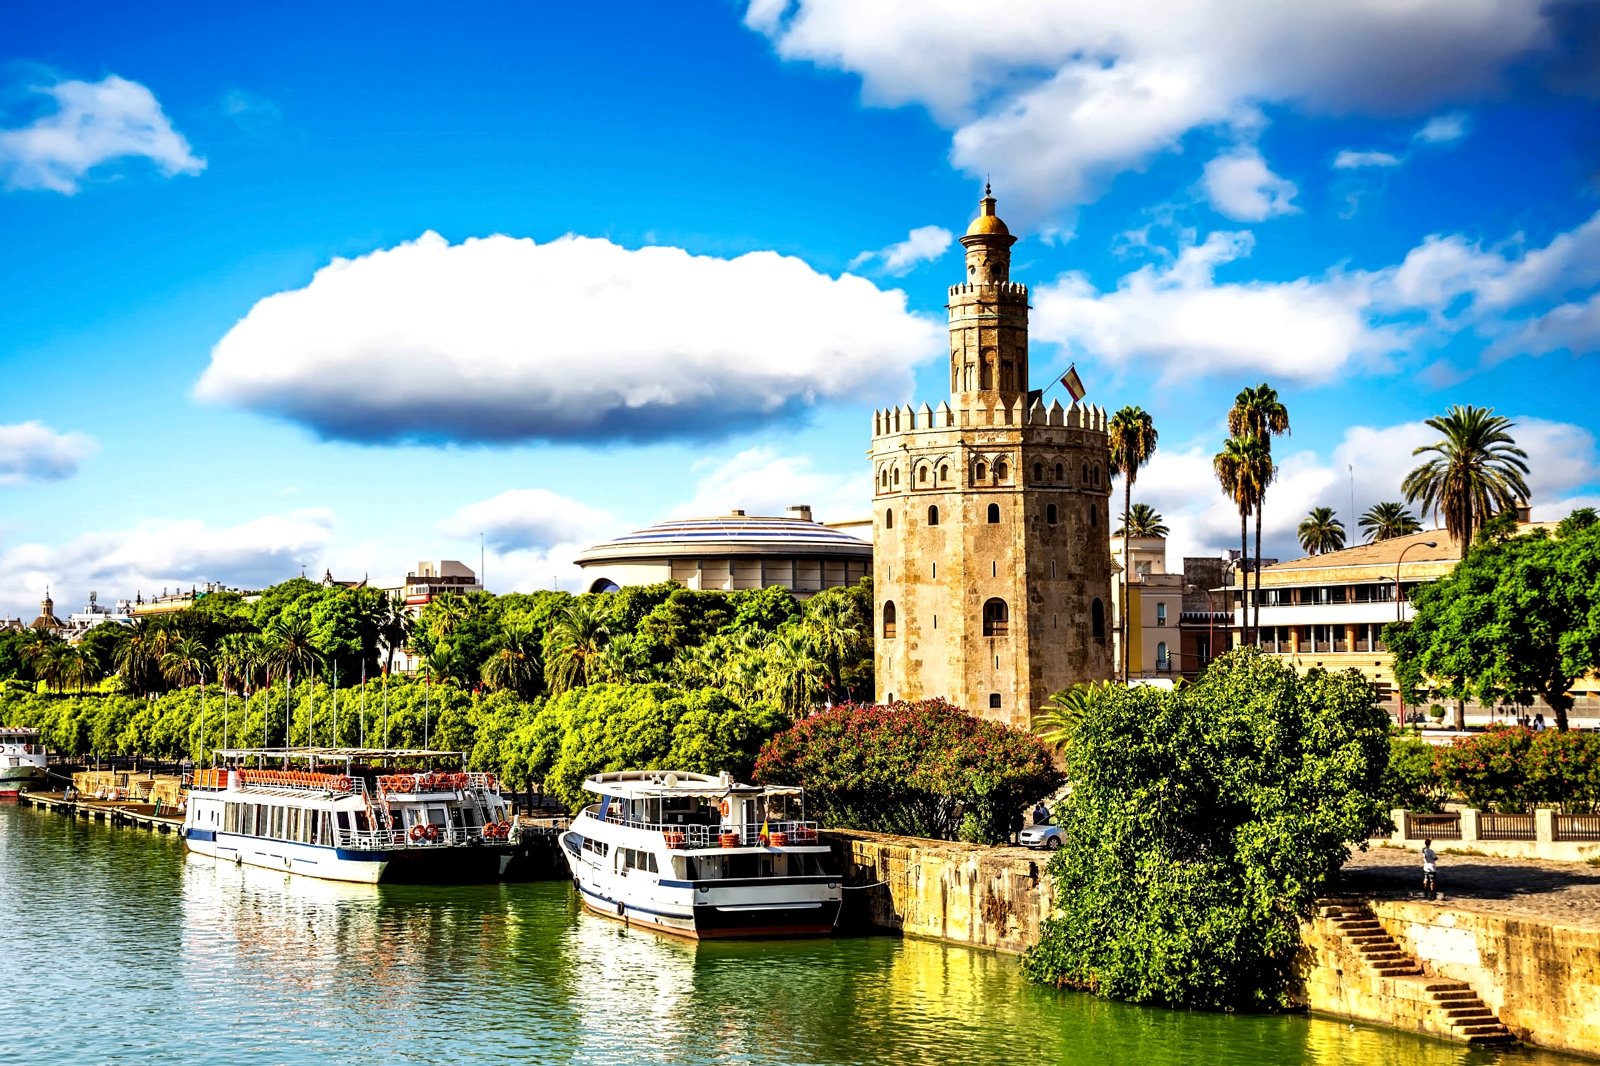 How to ride a river tram in Seville